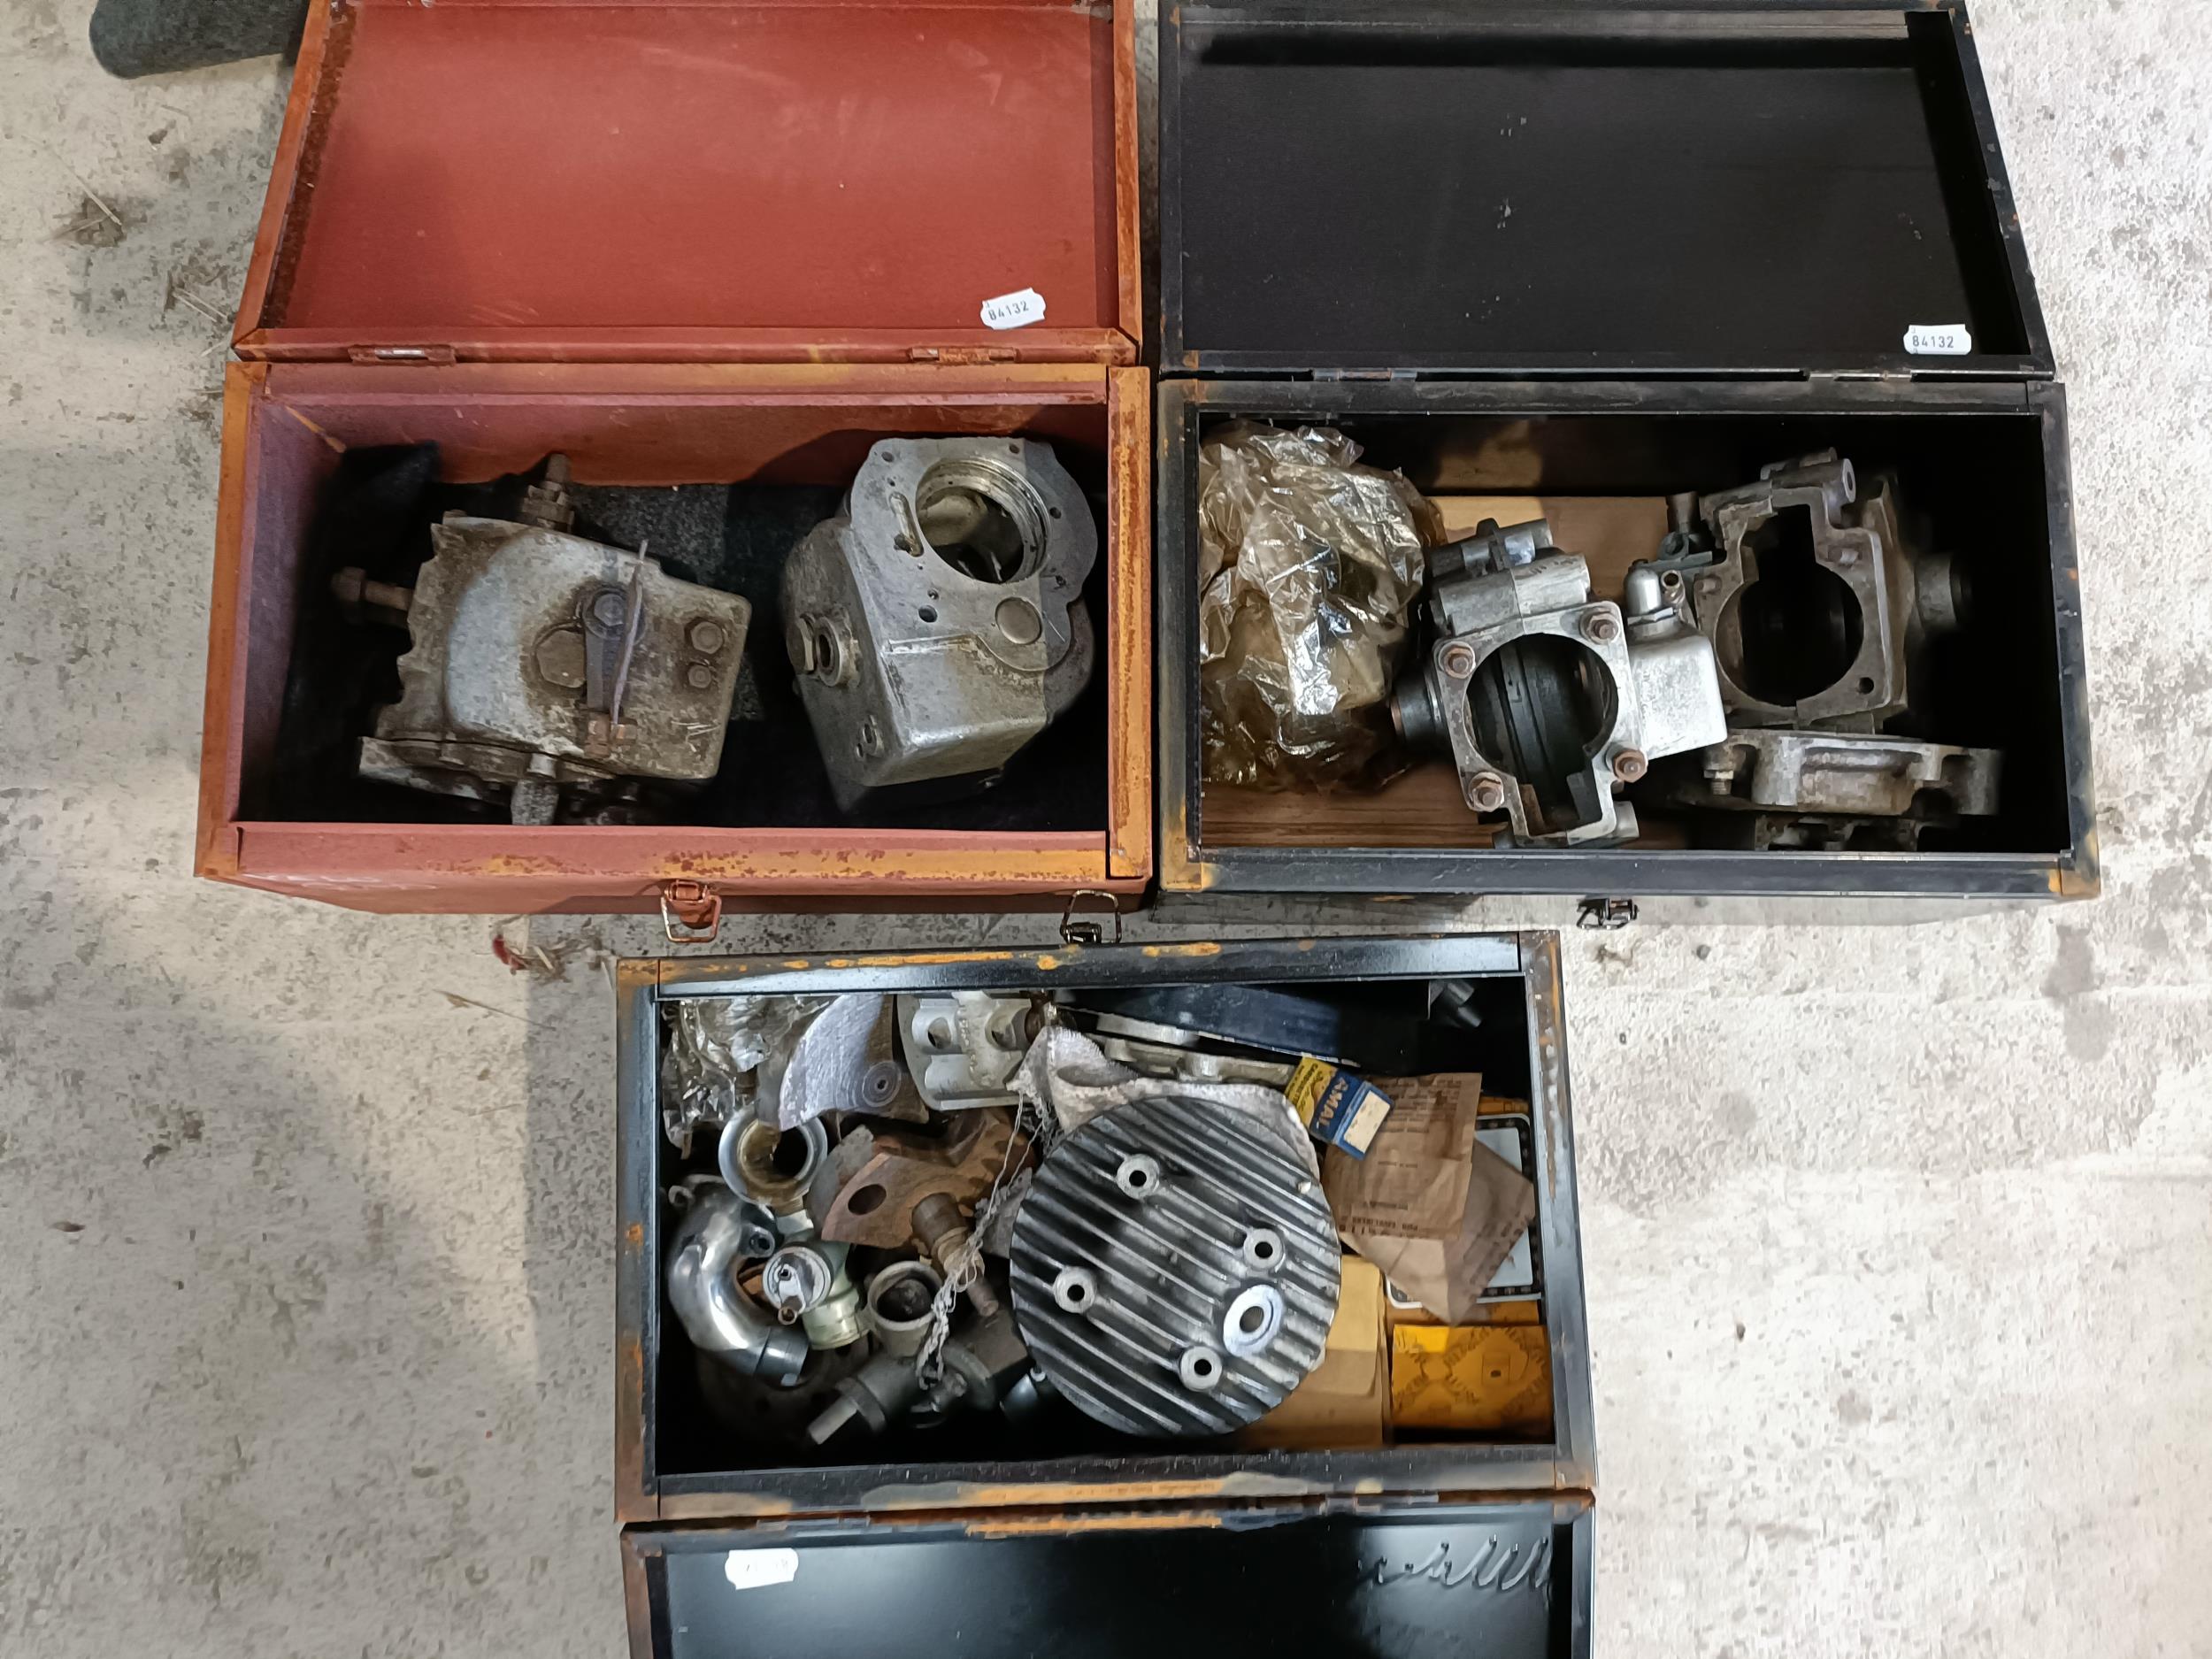 c.1930 Velocette GTP gearbox, crankcase and other parts